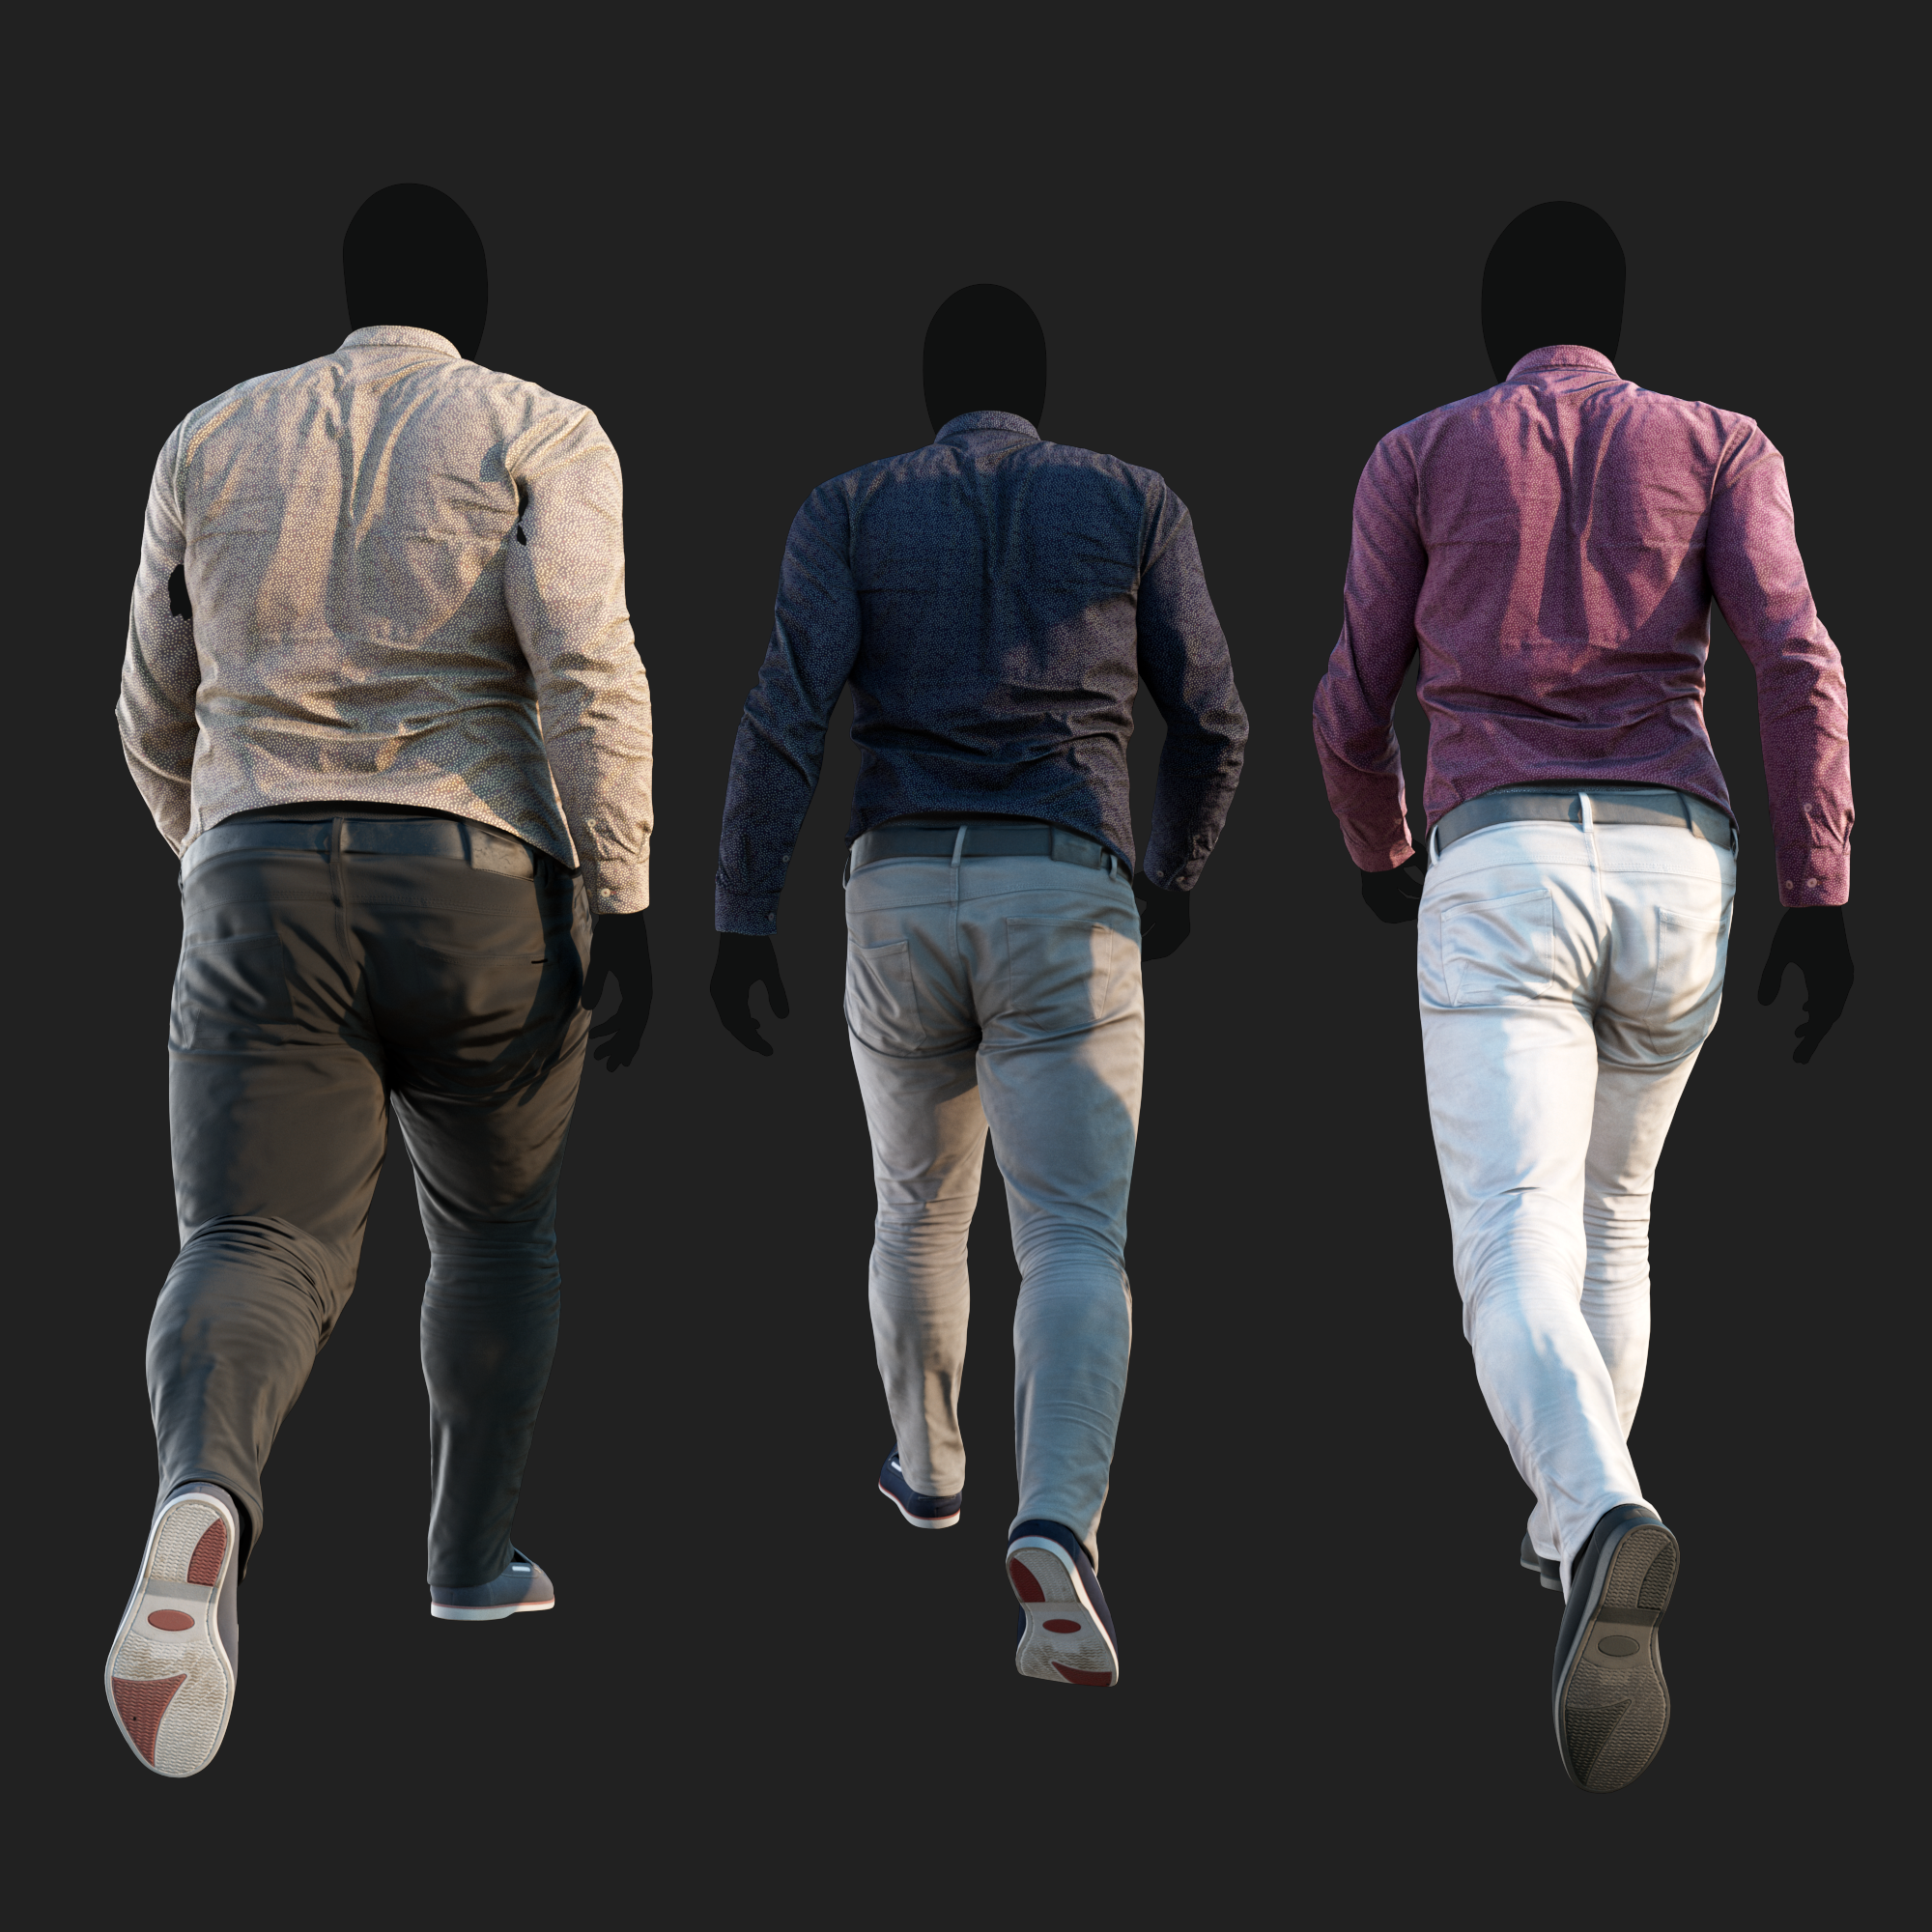 Realistic rendering of a 3D model of an animated walking male character dressed in a Camouflage Jacket and Jeans - back view